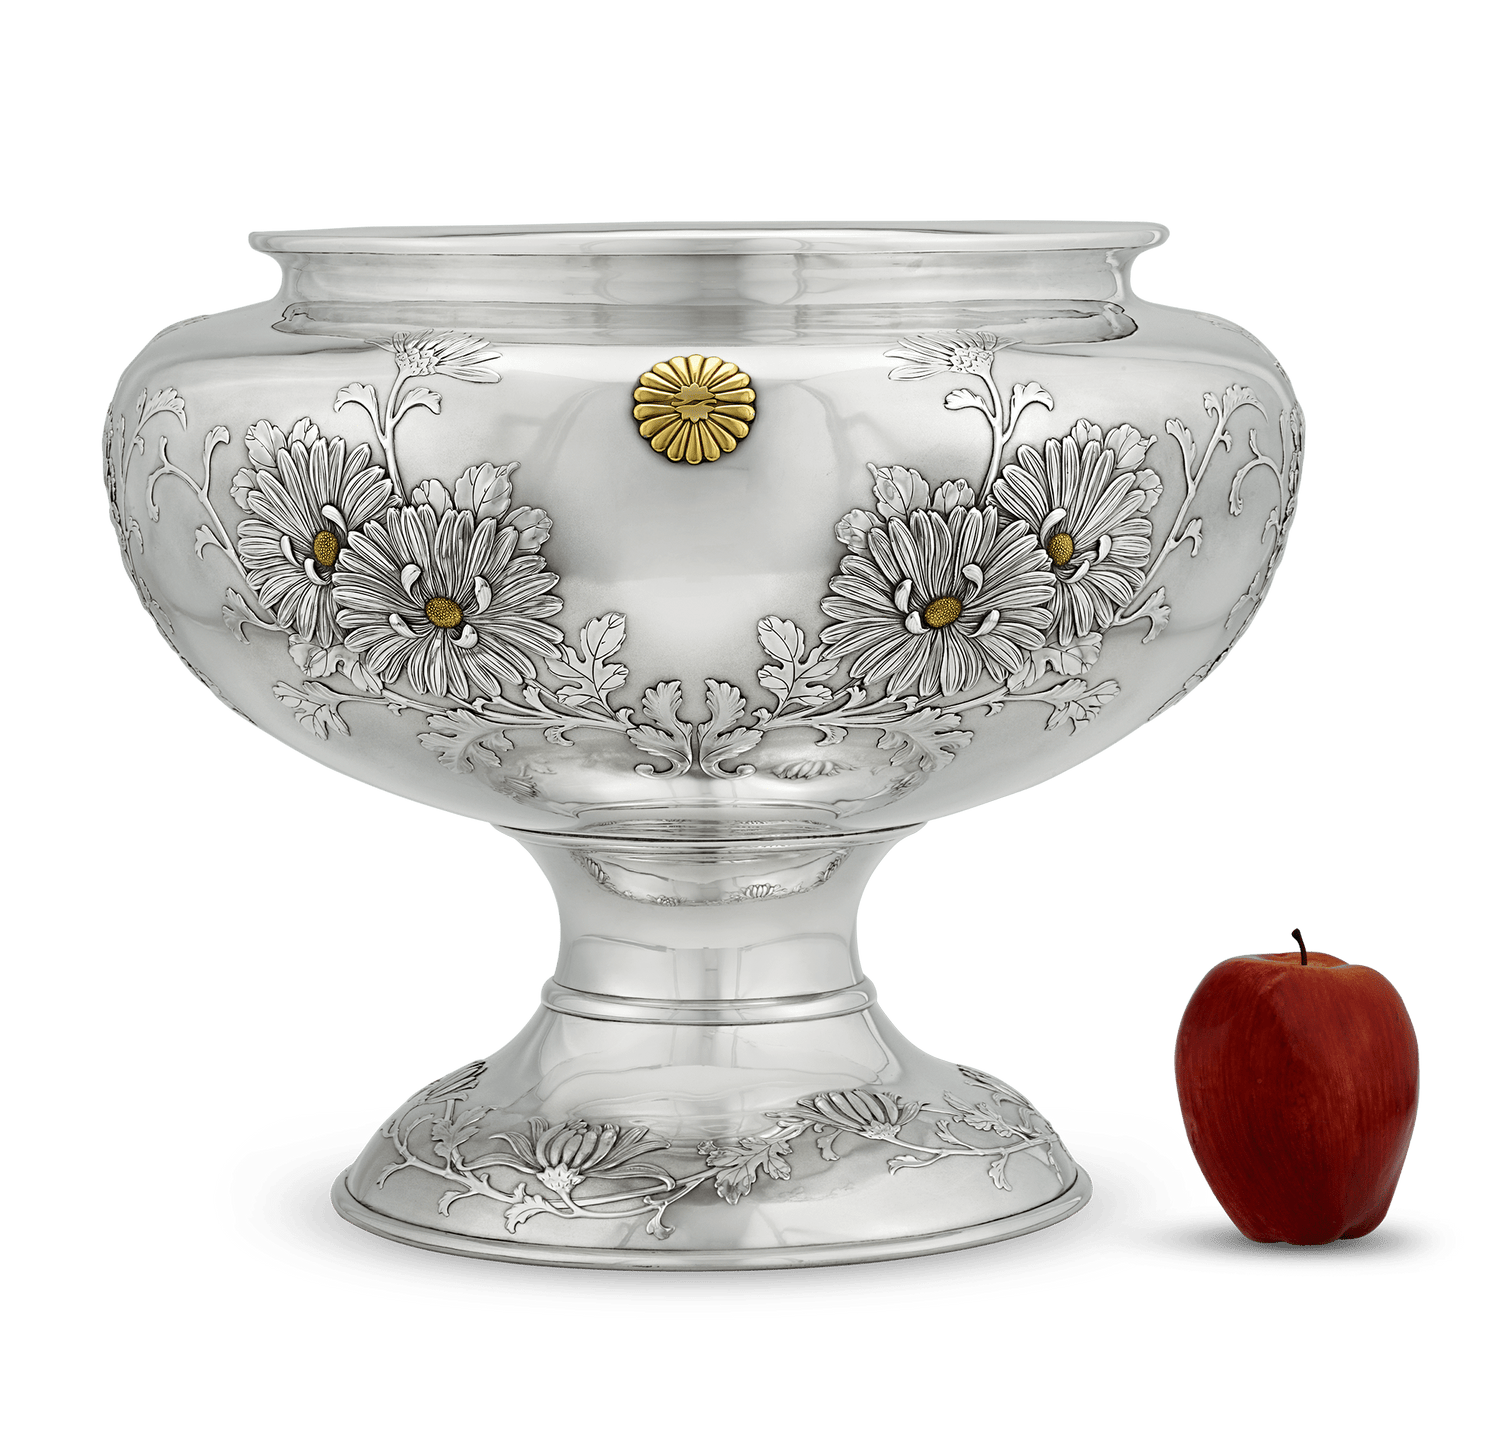 Japanese Imperial Silver Bowl